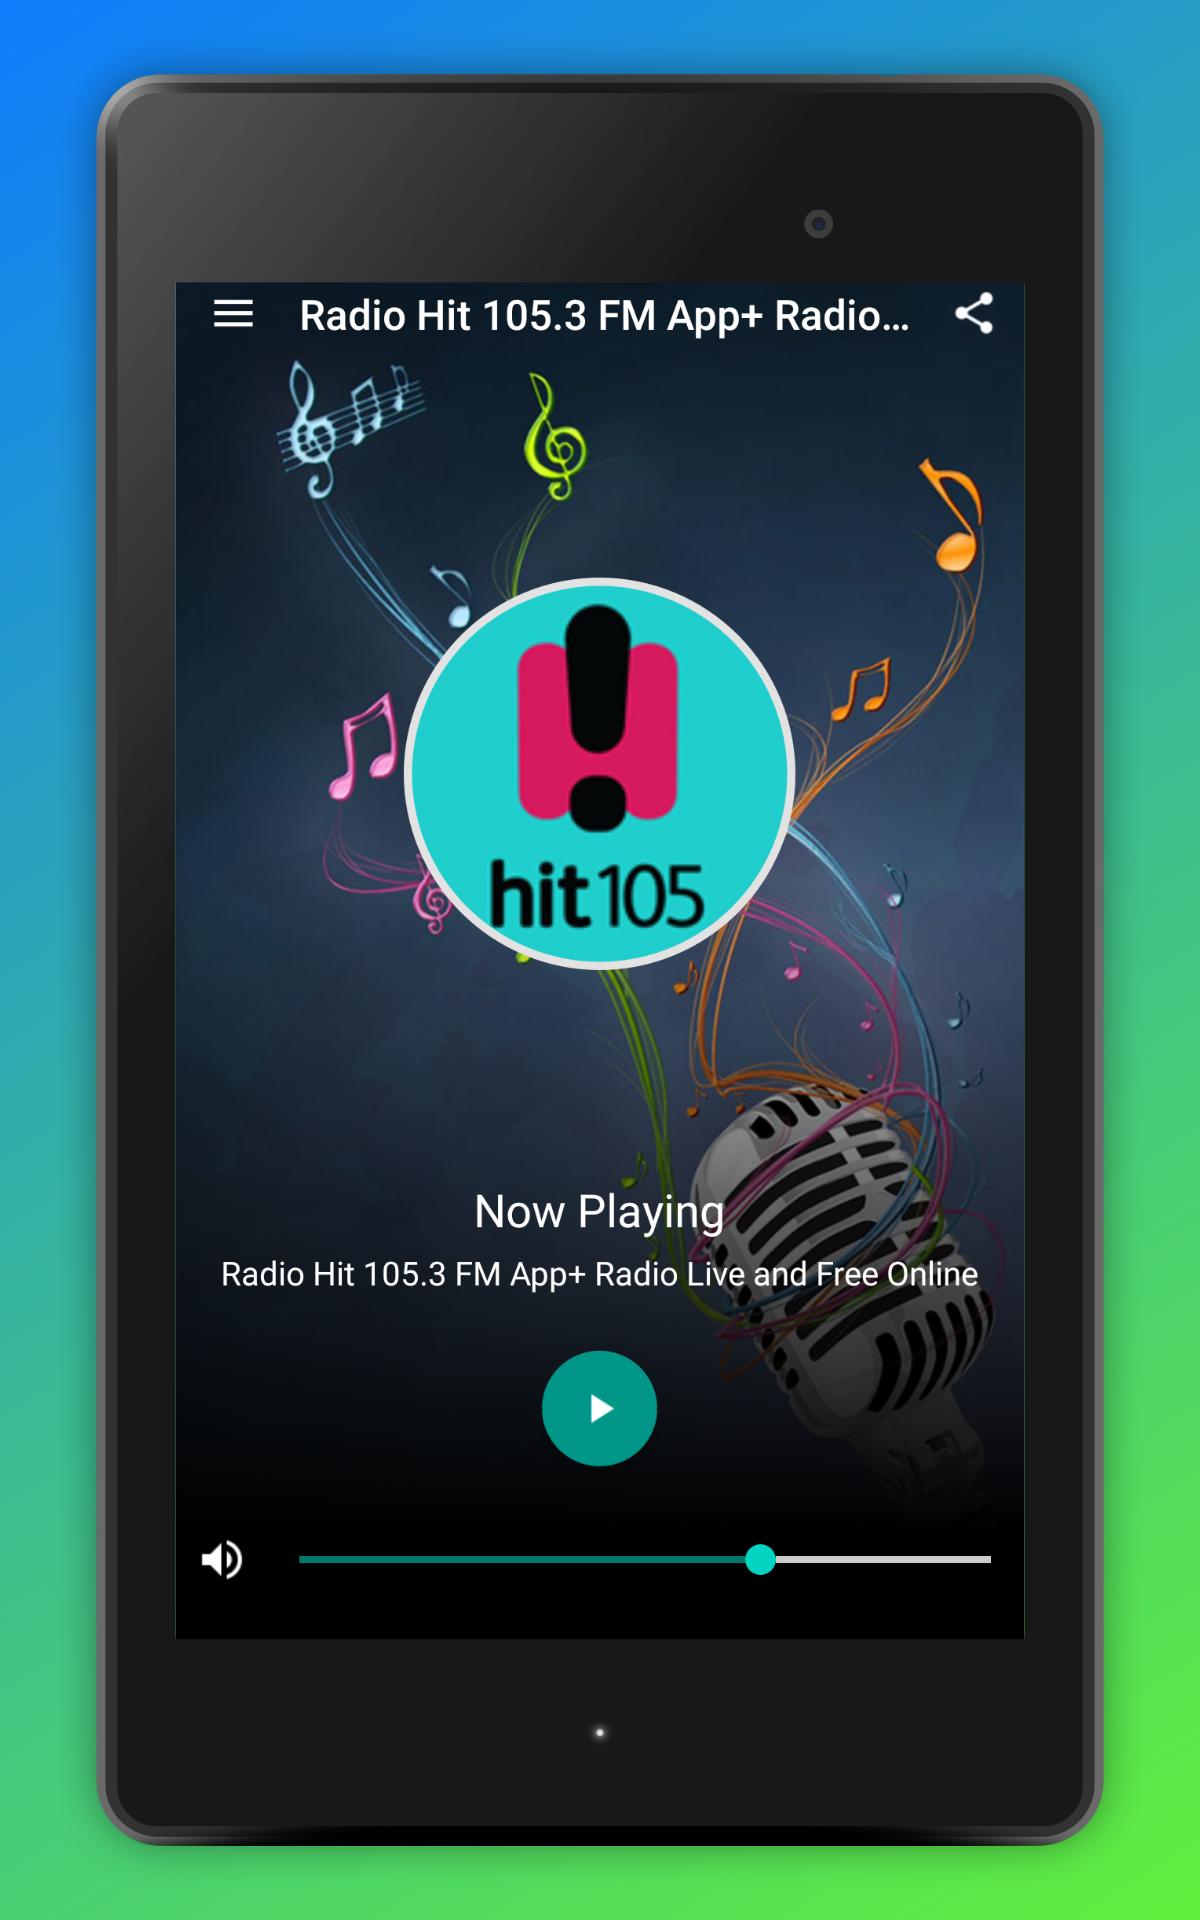 Radio Hit 105.3 FM Radio AUS Live and Free Online for Android - APK Download